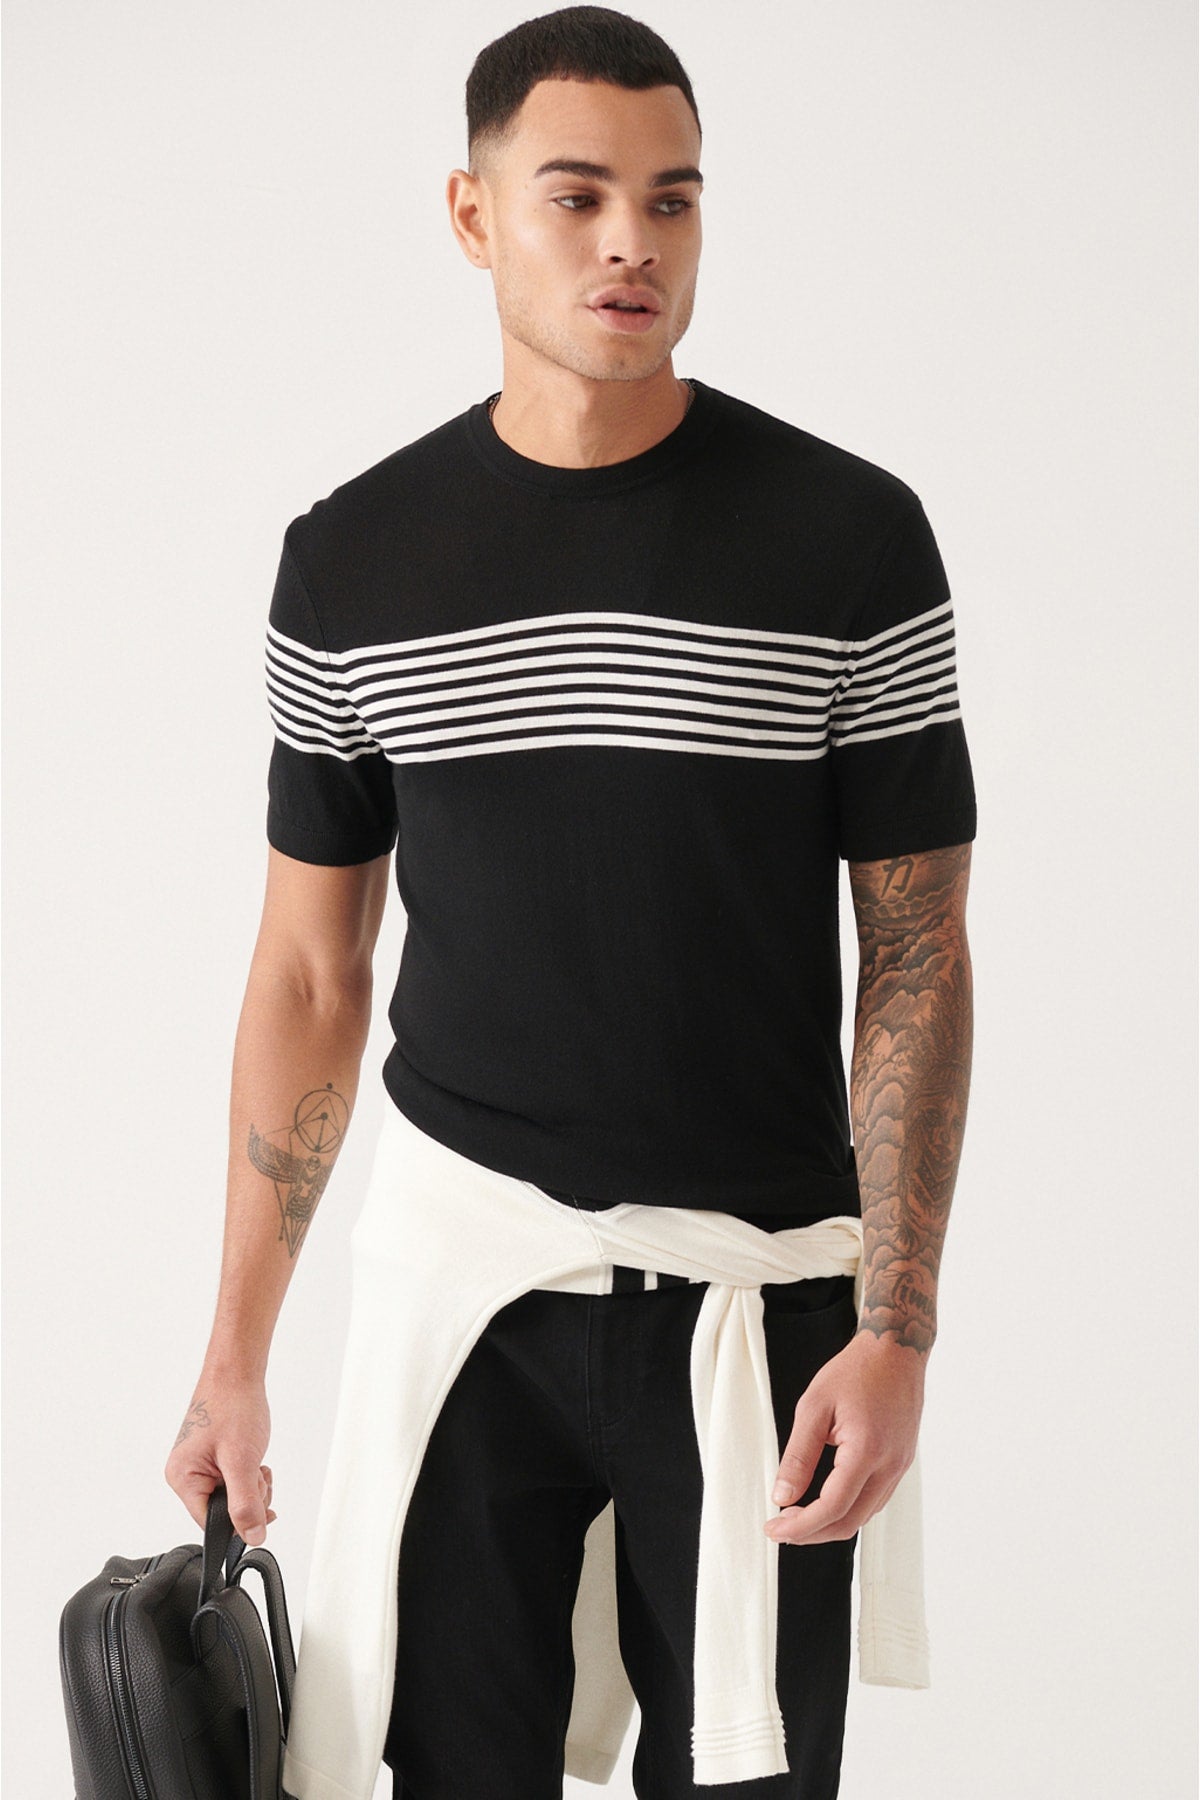 Men's black bike collar chest and arm line detailed knitwear T-shirt A31y5116